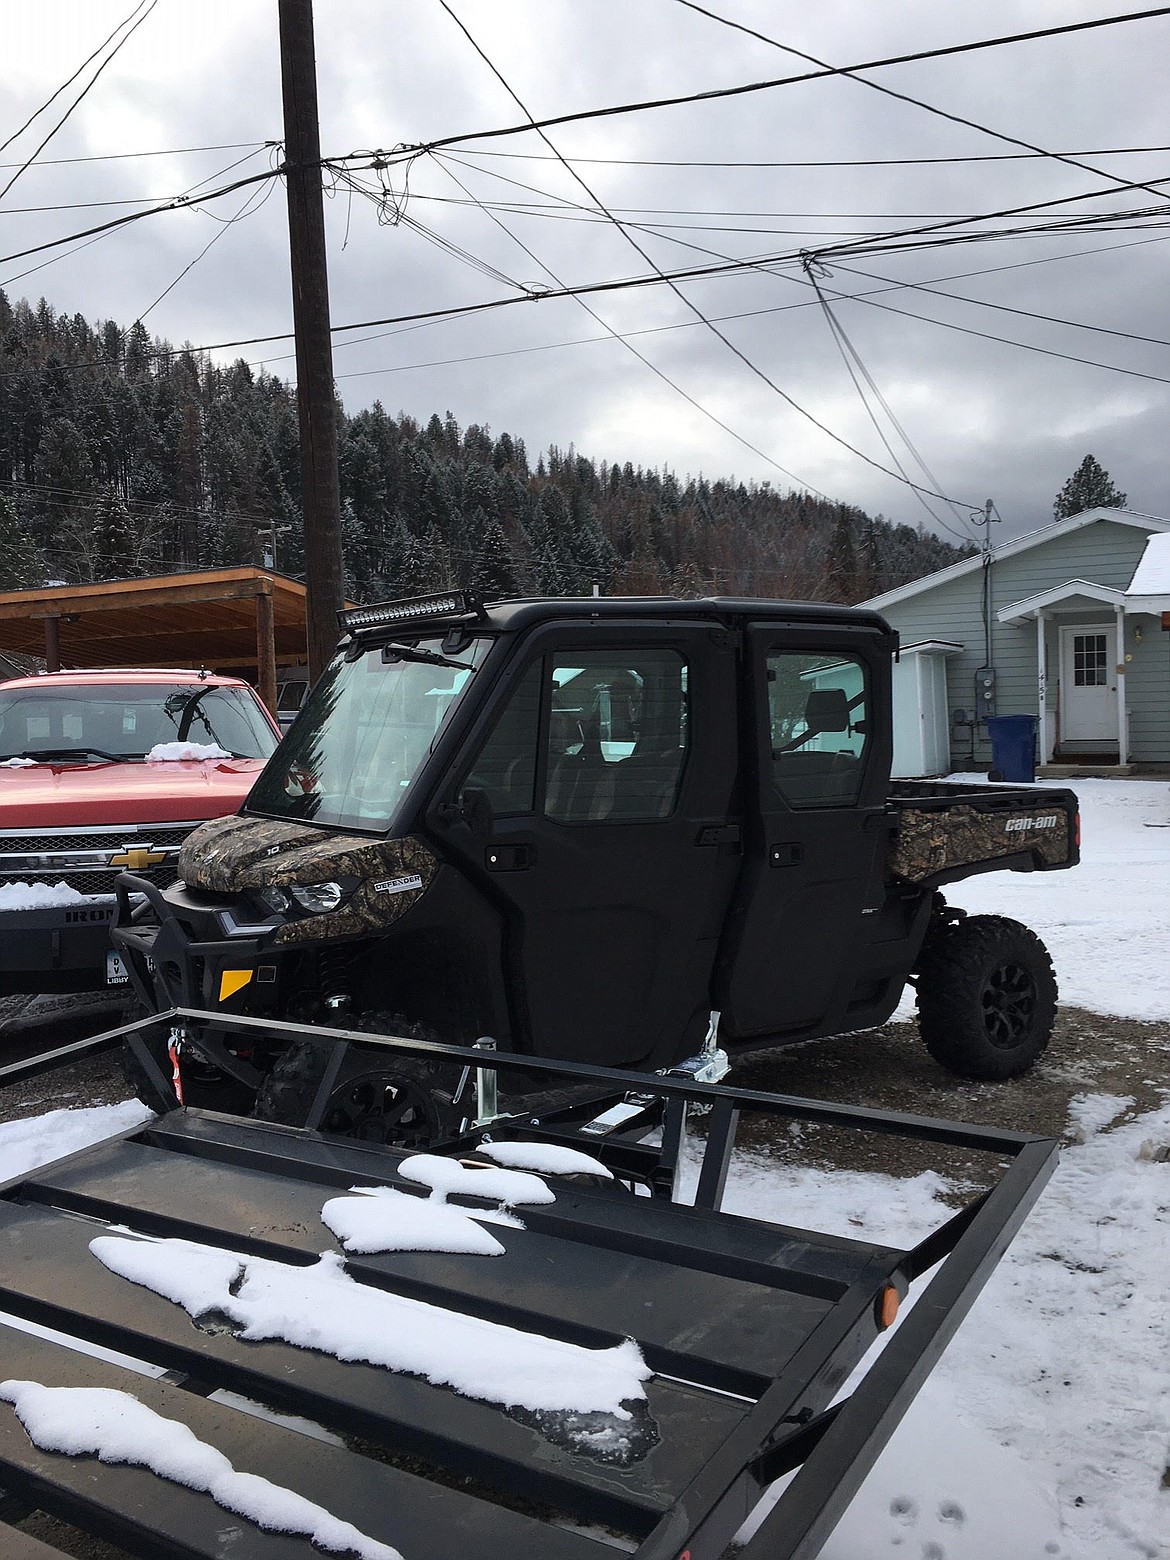 John Hantz's Can-Am side-by-side. A concerned neighbor reported Hantz missing on March 23 after he headed into the Lincoln County backcountry in the side-by-side with his dog. Rescuers found Hantz in safe condition the following day. (Photo courtesy of Rachel Hantz)